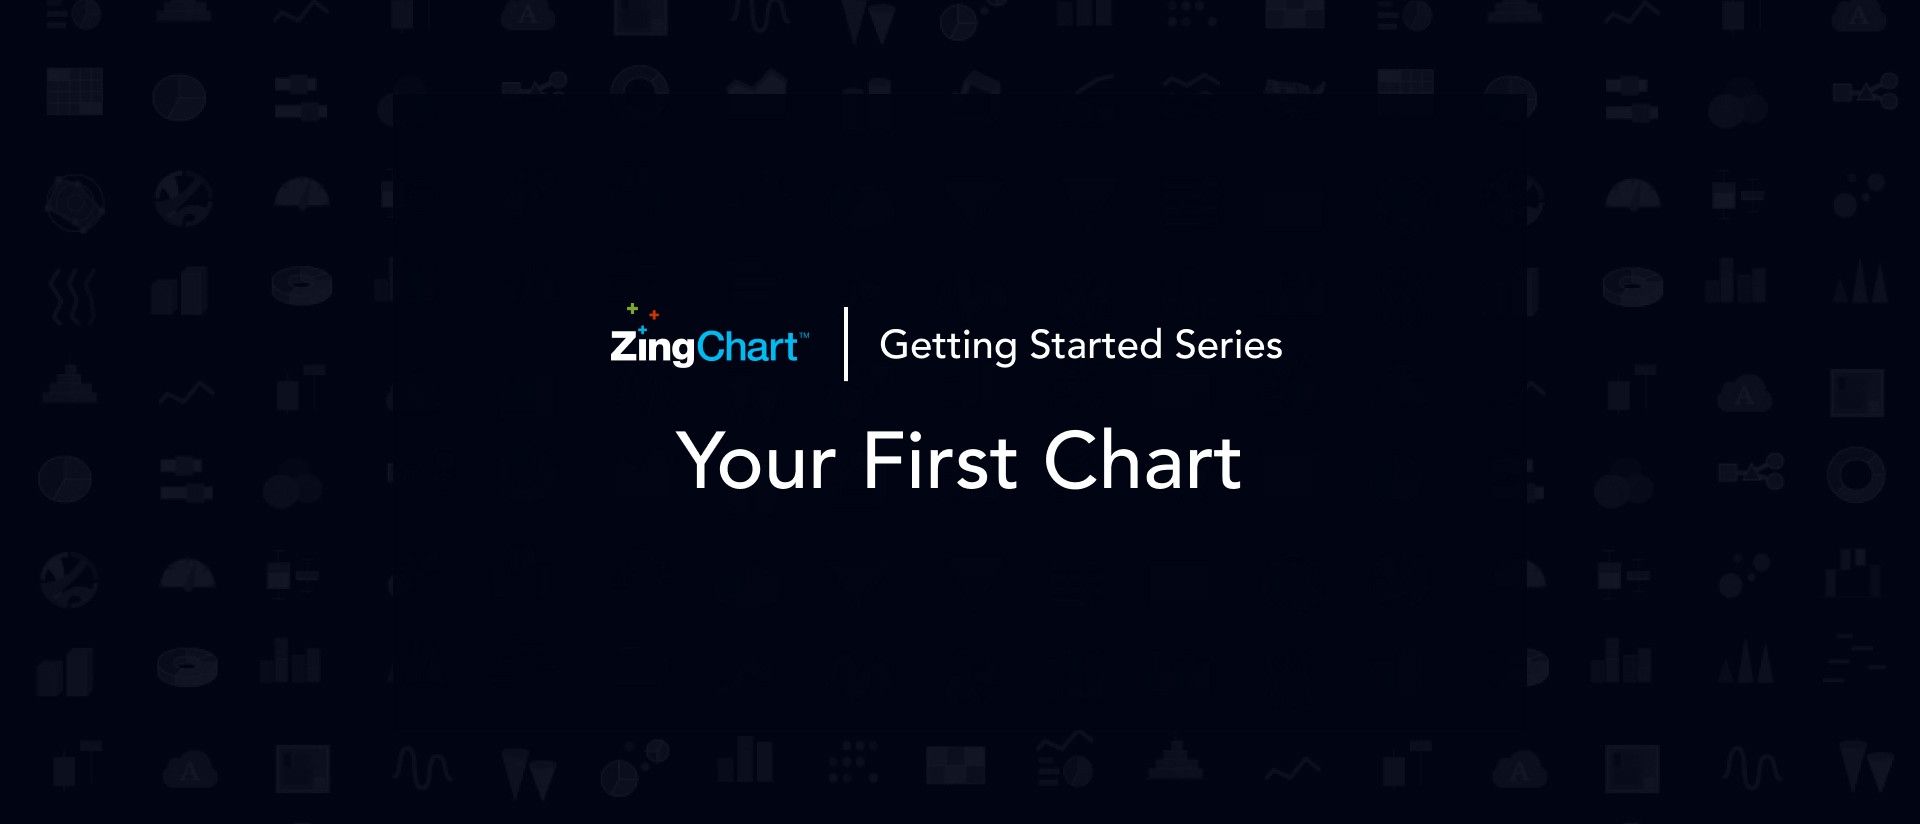 Cover image for 'Your First Chart' blog post